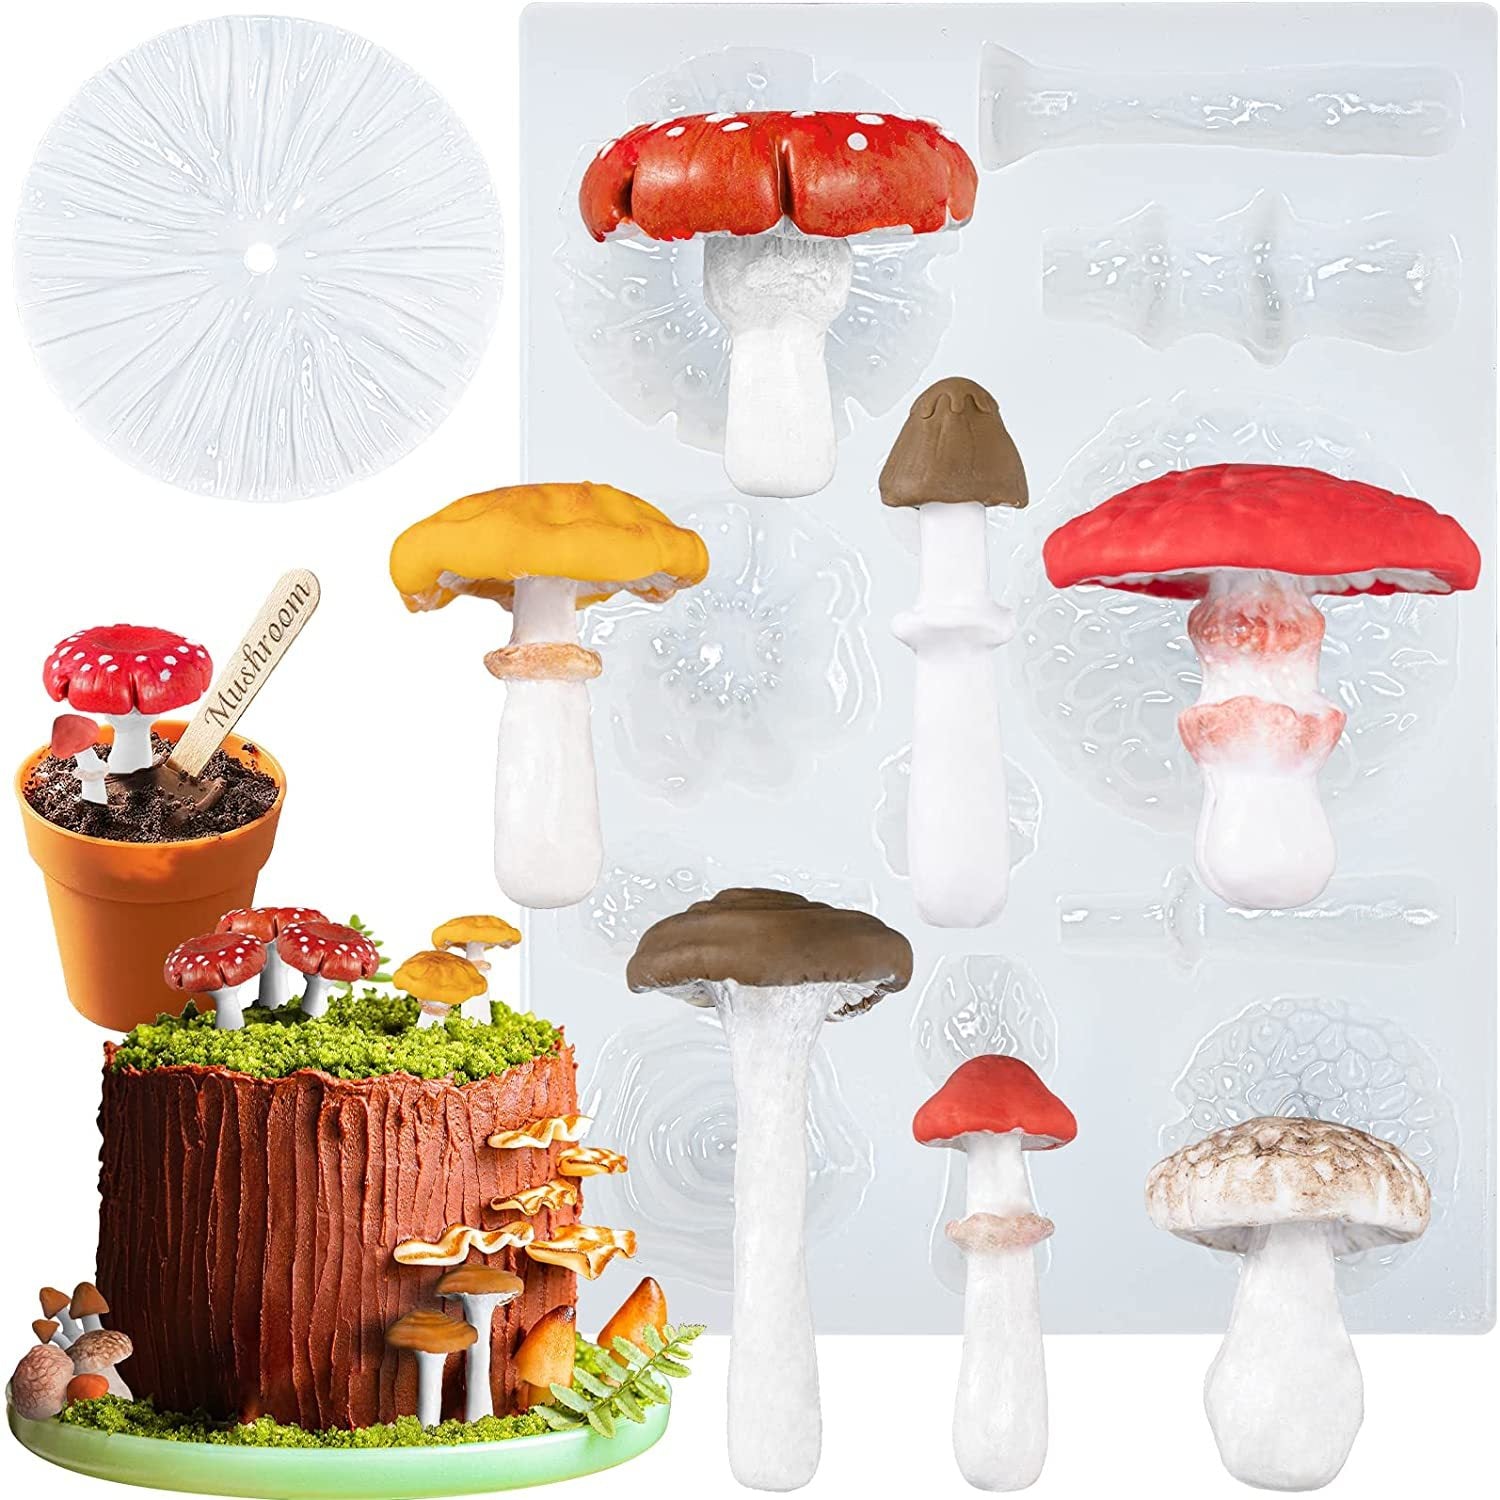 Mushroom Silicone Mold Flexible Easy to Use With Food Fondant